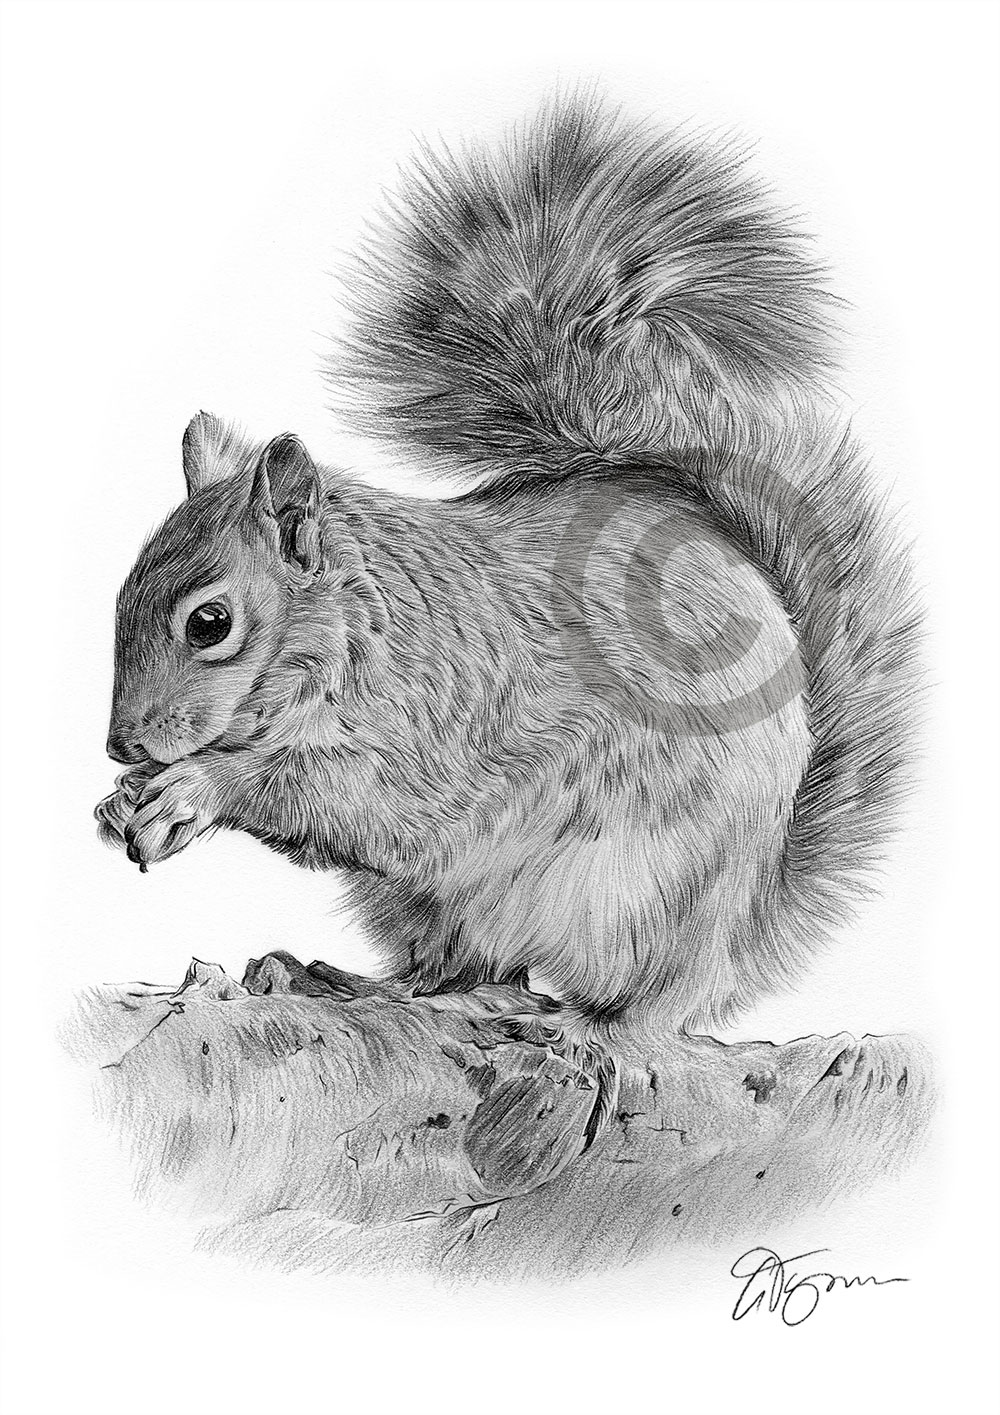 Pencil drawing of a young grey squirrel by UK artist Gary Tymon